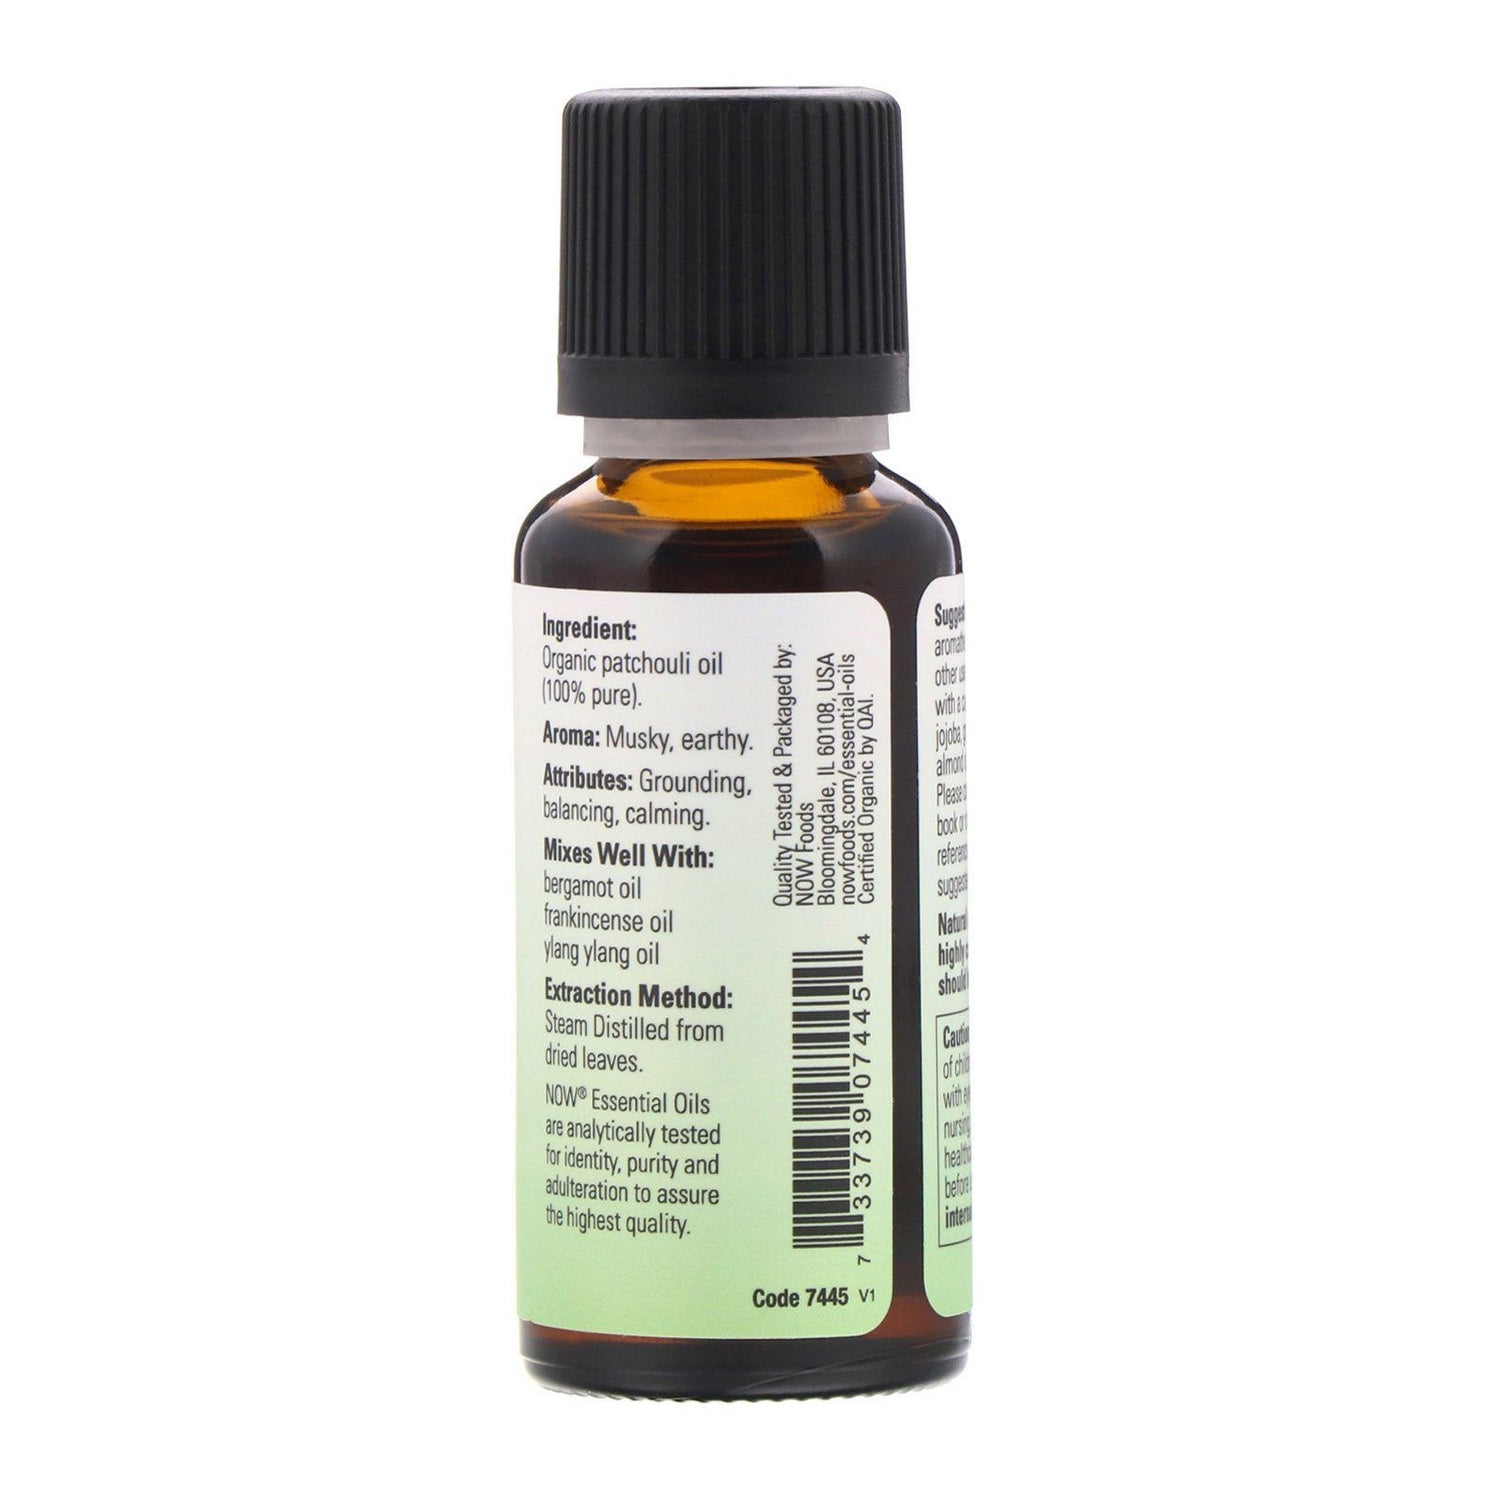 (30% OFF) NOW Organic Patchouli Oil, Earthy Aromatherapy Scent, Steam Distilled, 100% Pure, (30ml) - Bloom Concept